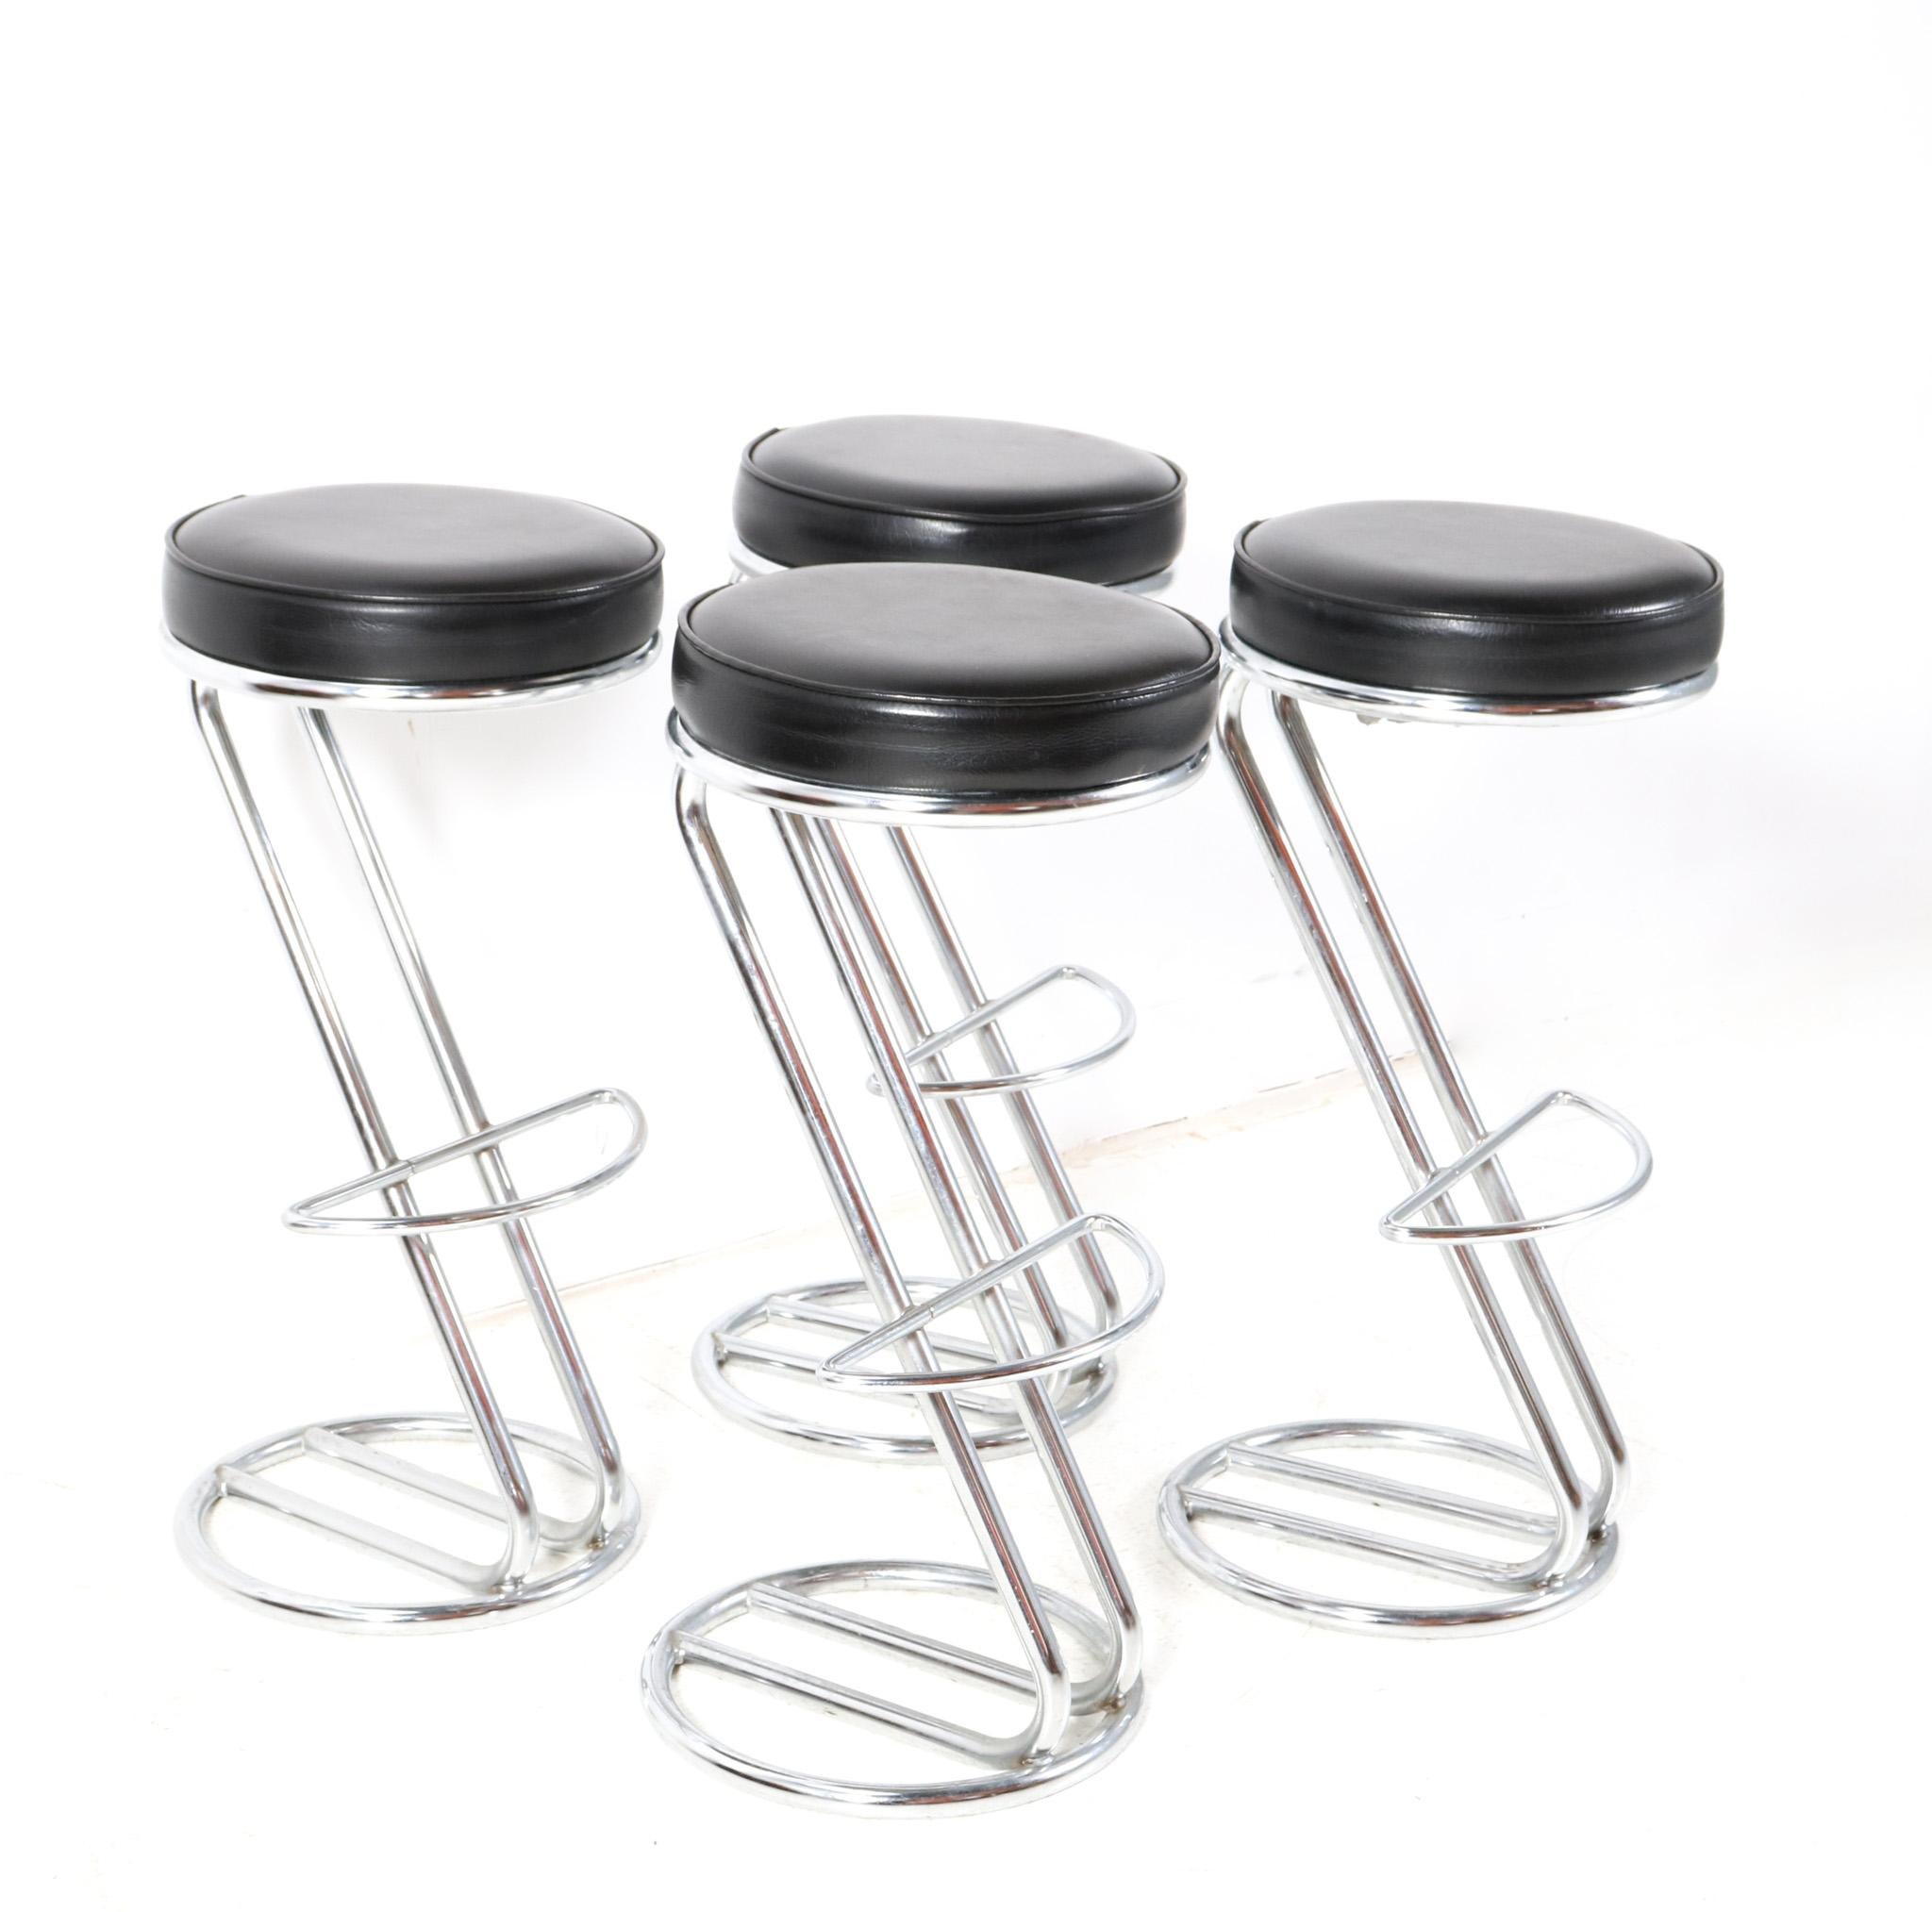 Stunning and elegant set of four Mid-Century Modern barstools.
Striking Dutch design from the 1970s.
Original chrome-plated metal base with original black faux leather seat.
This wonderful set of four Mid-Century Modern barstools is in very good